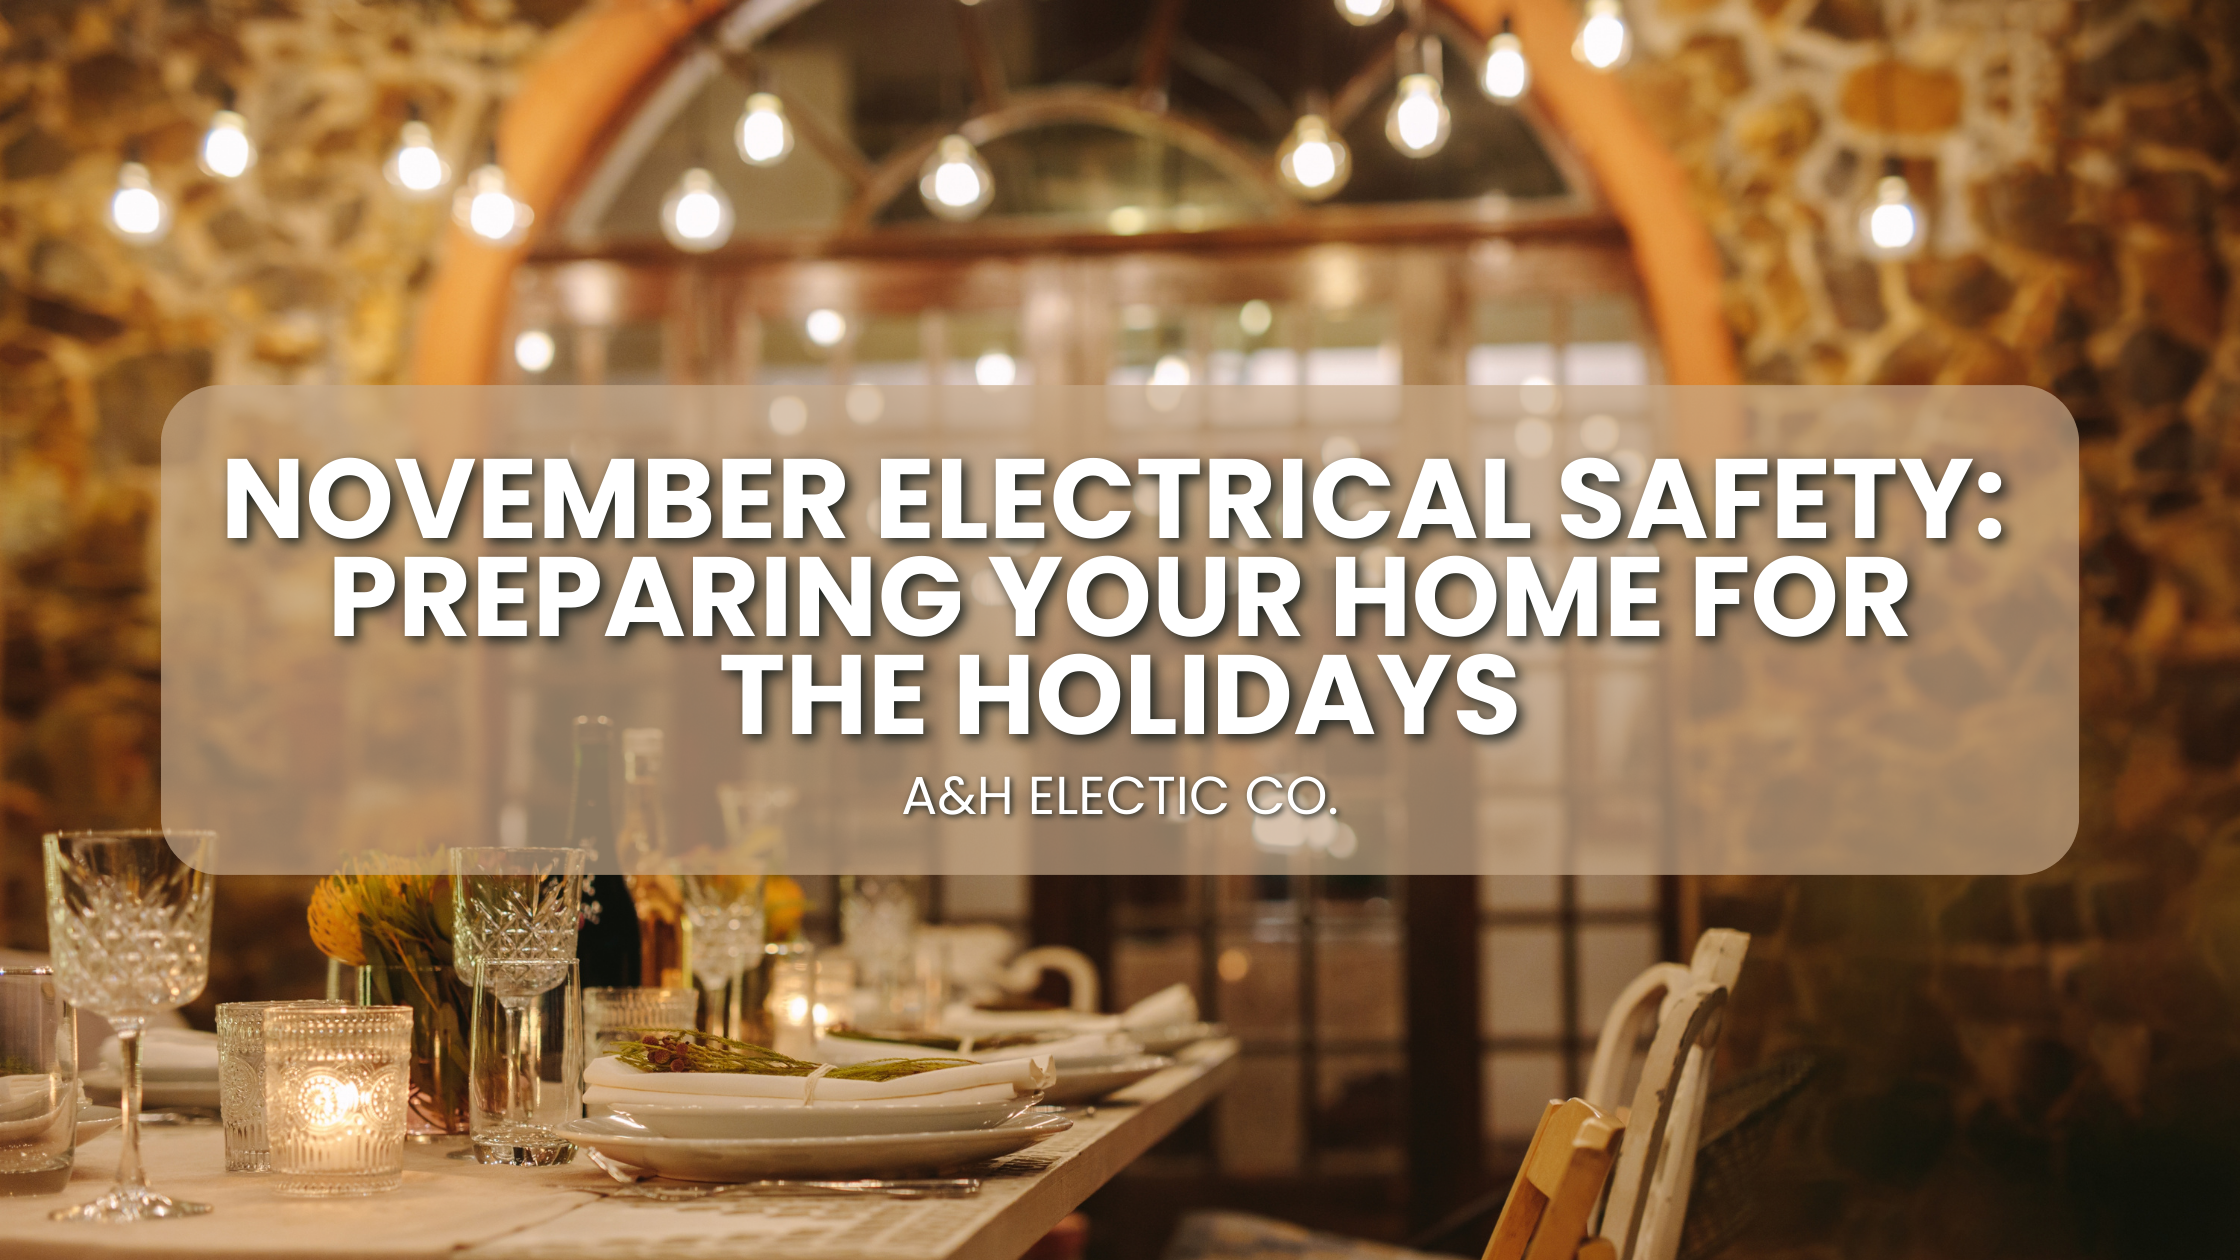 November Electrical Safety: Preparing Your Home for the Holidays